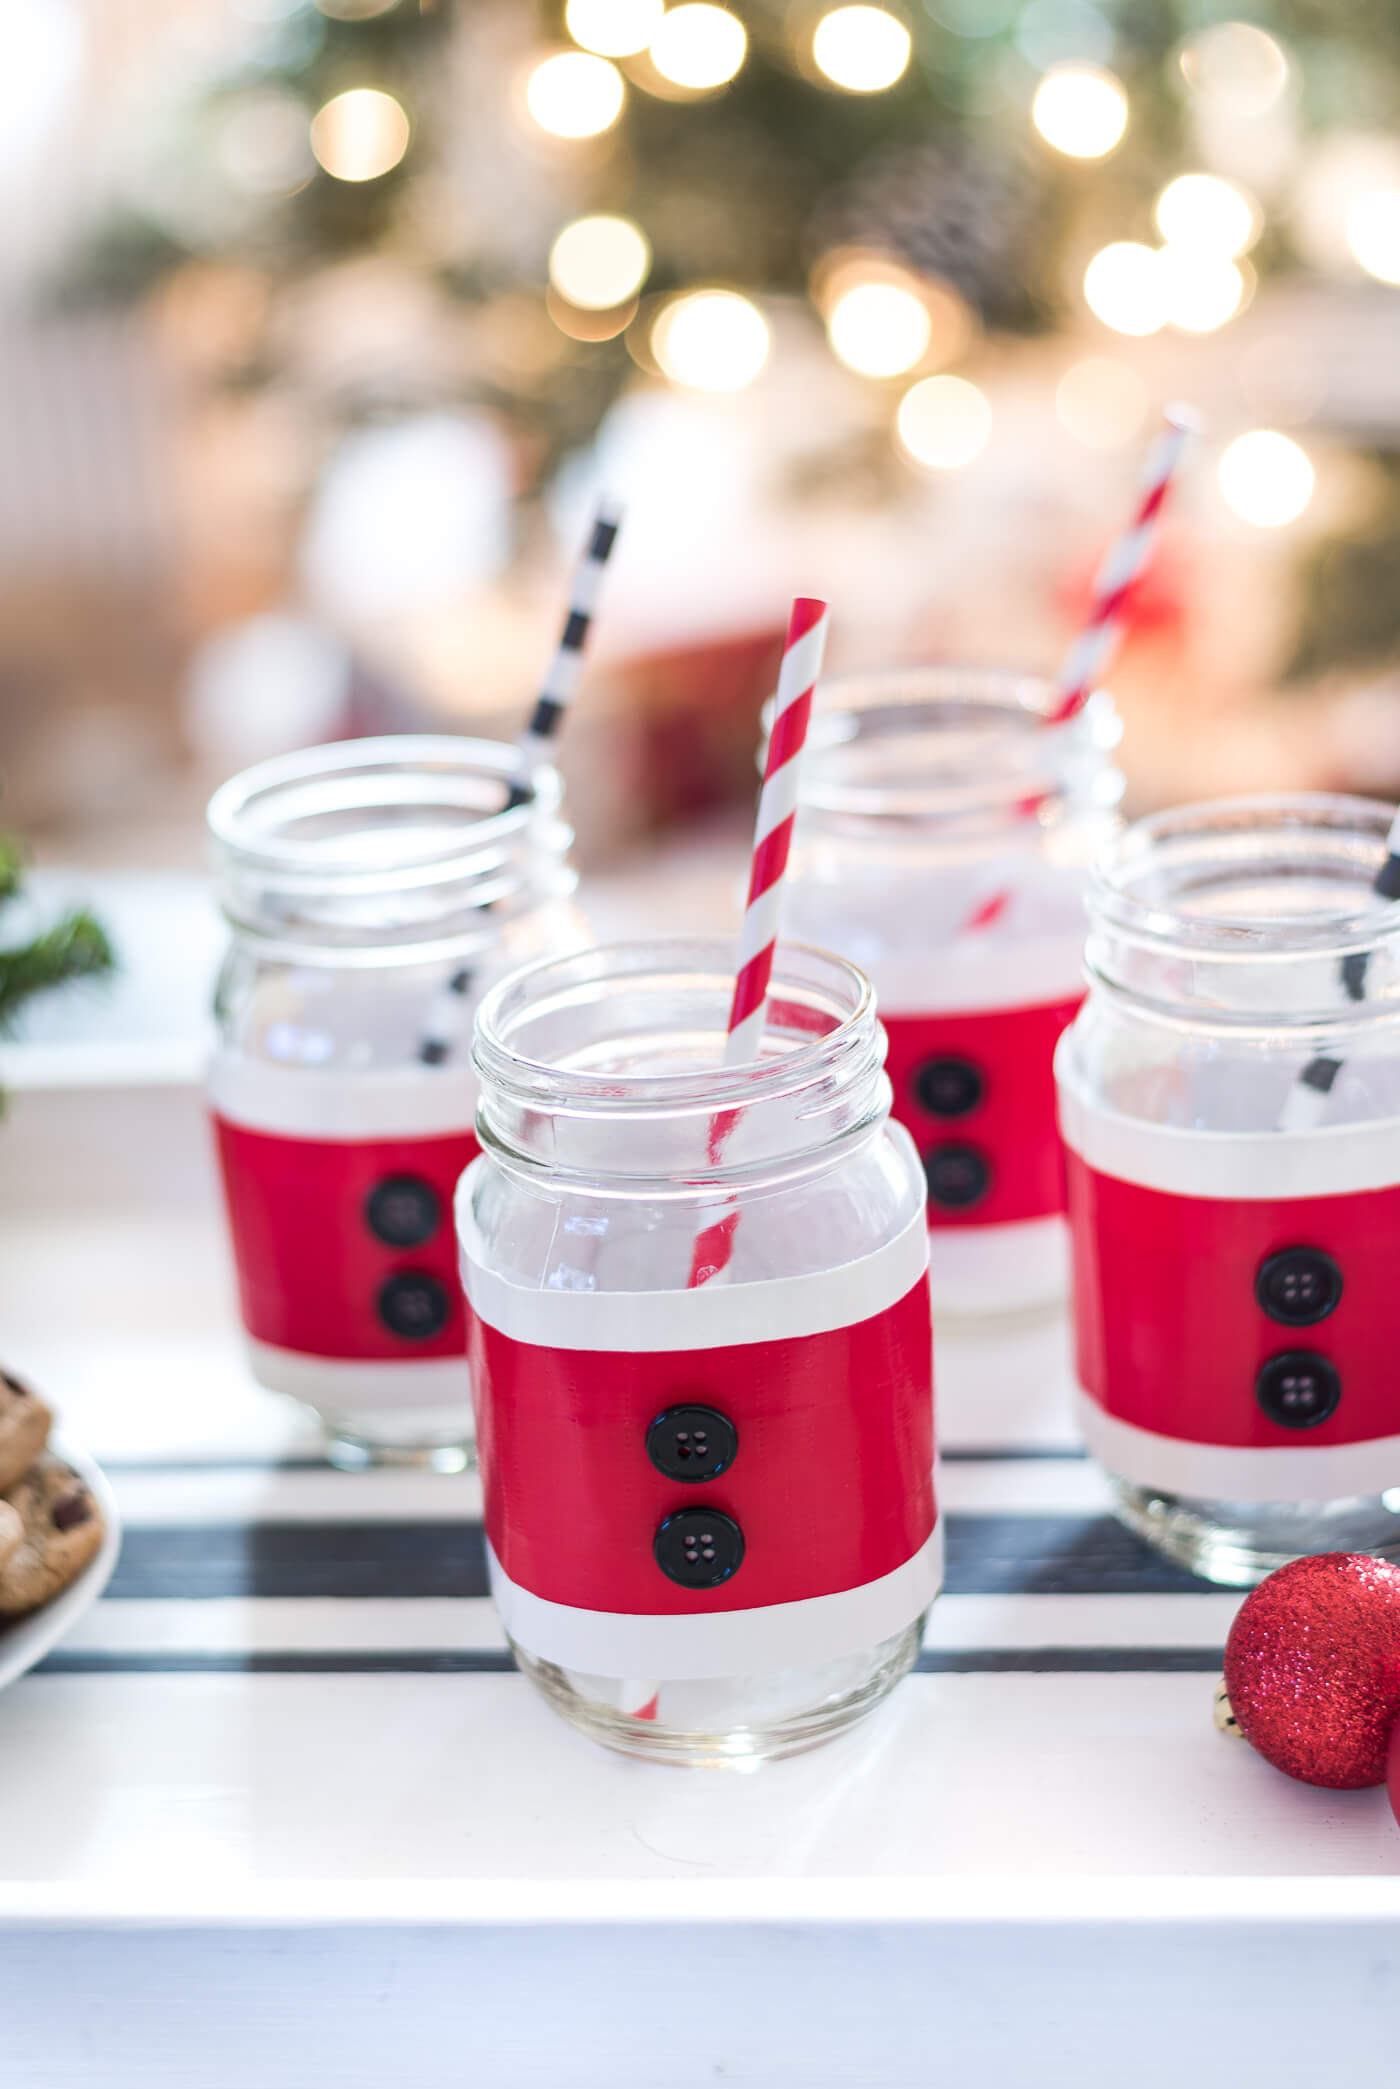 Easy To Make Mason Jars Using Button And Straws